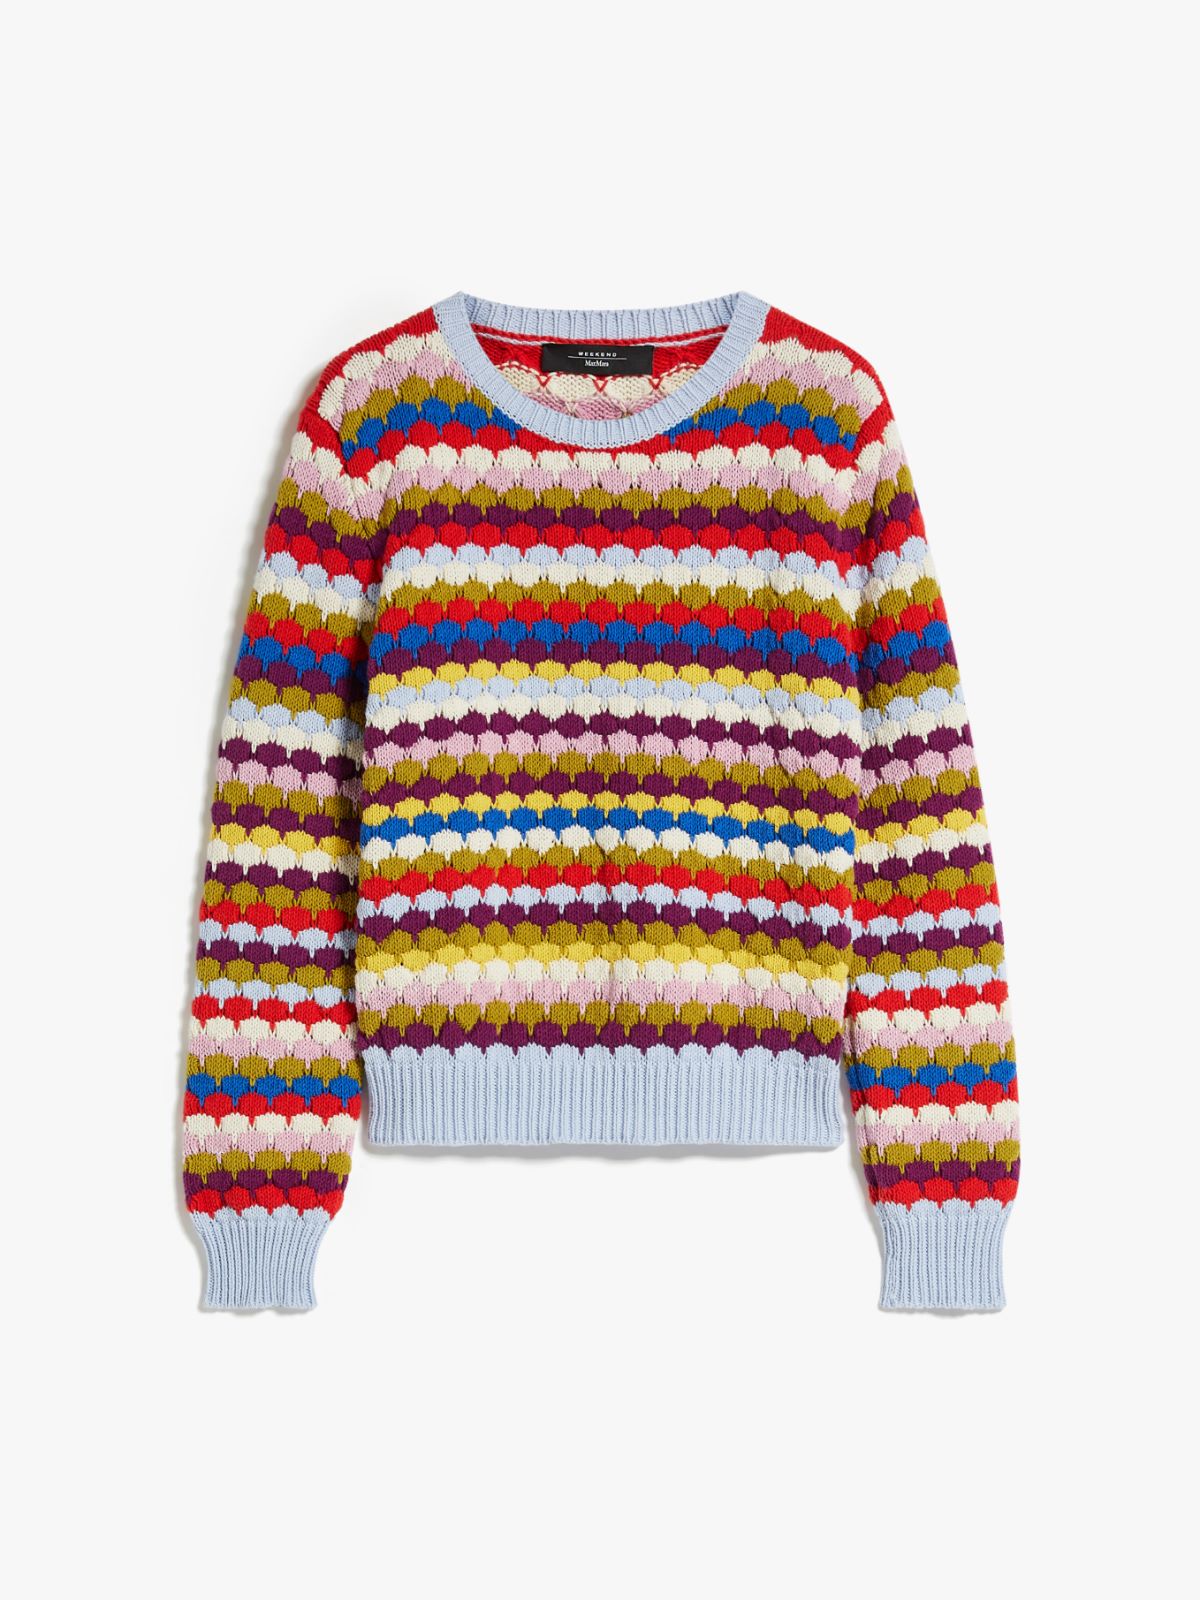 Round-neck knit top in striped cotton - MULTICOLOUR - Weekend Max Mara - 6